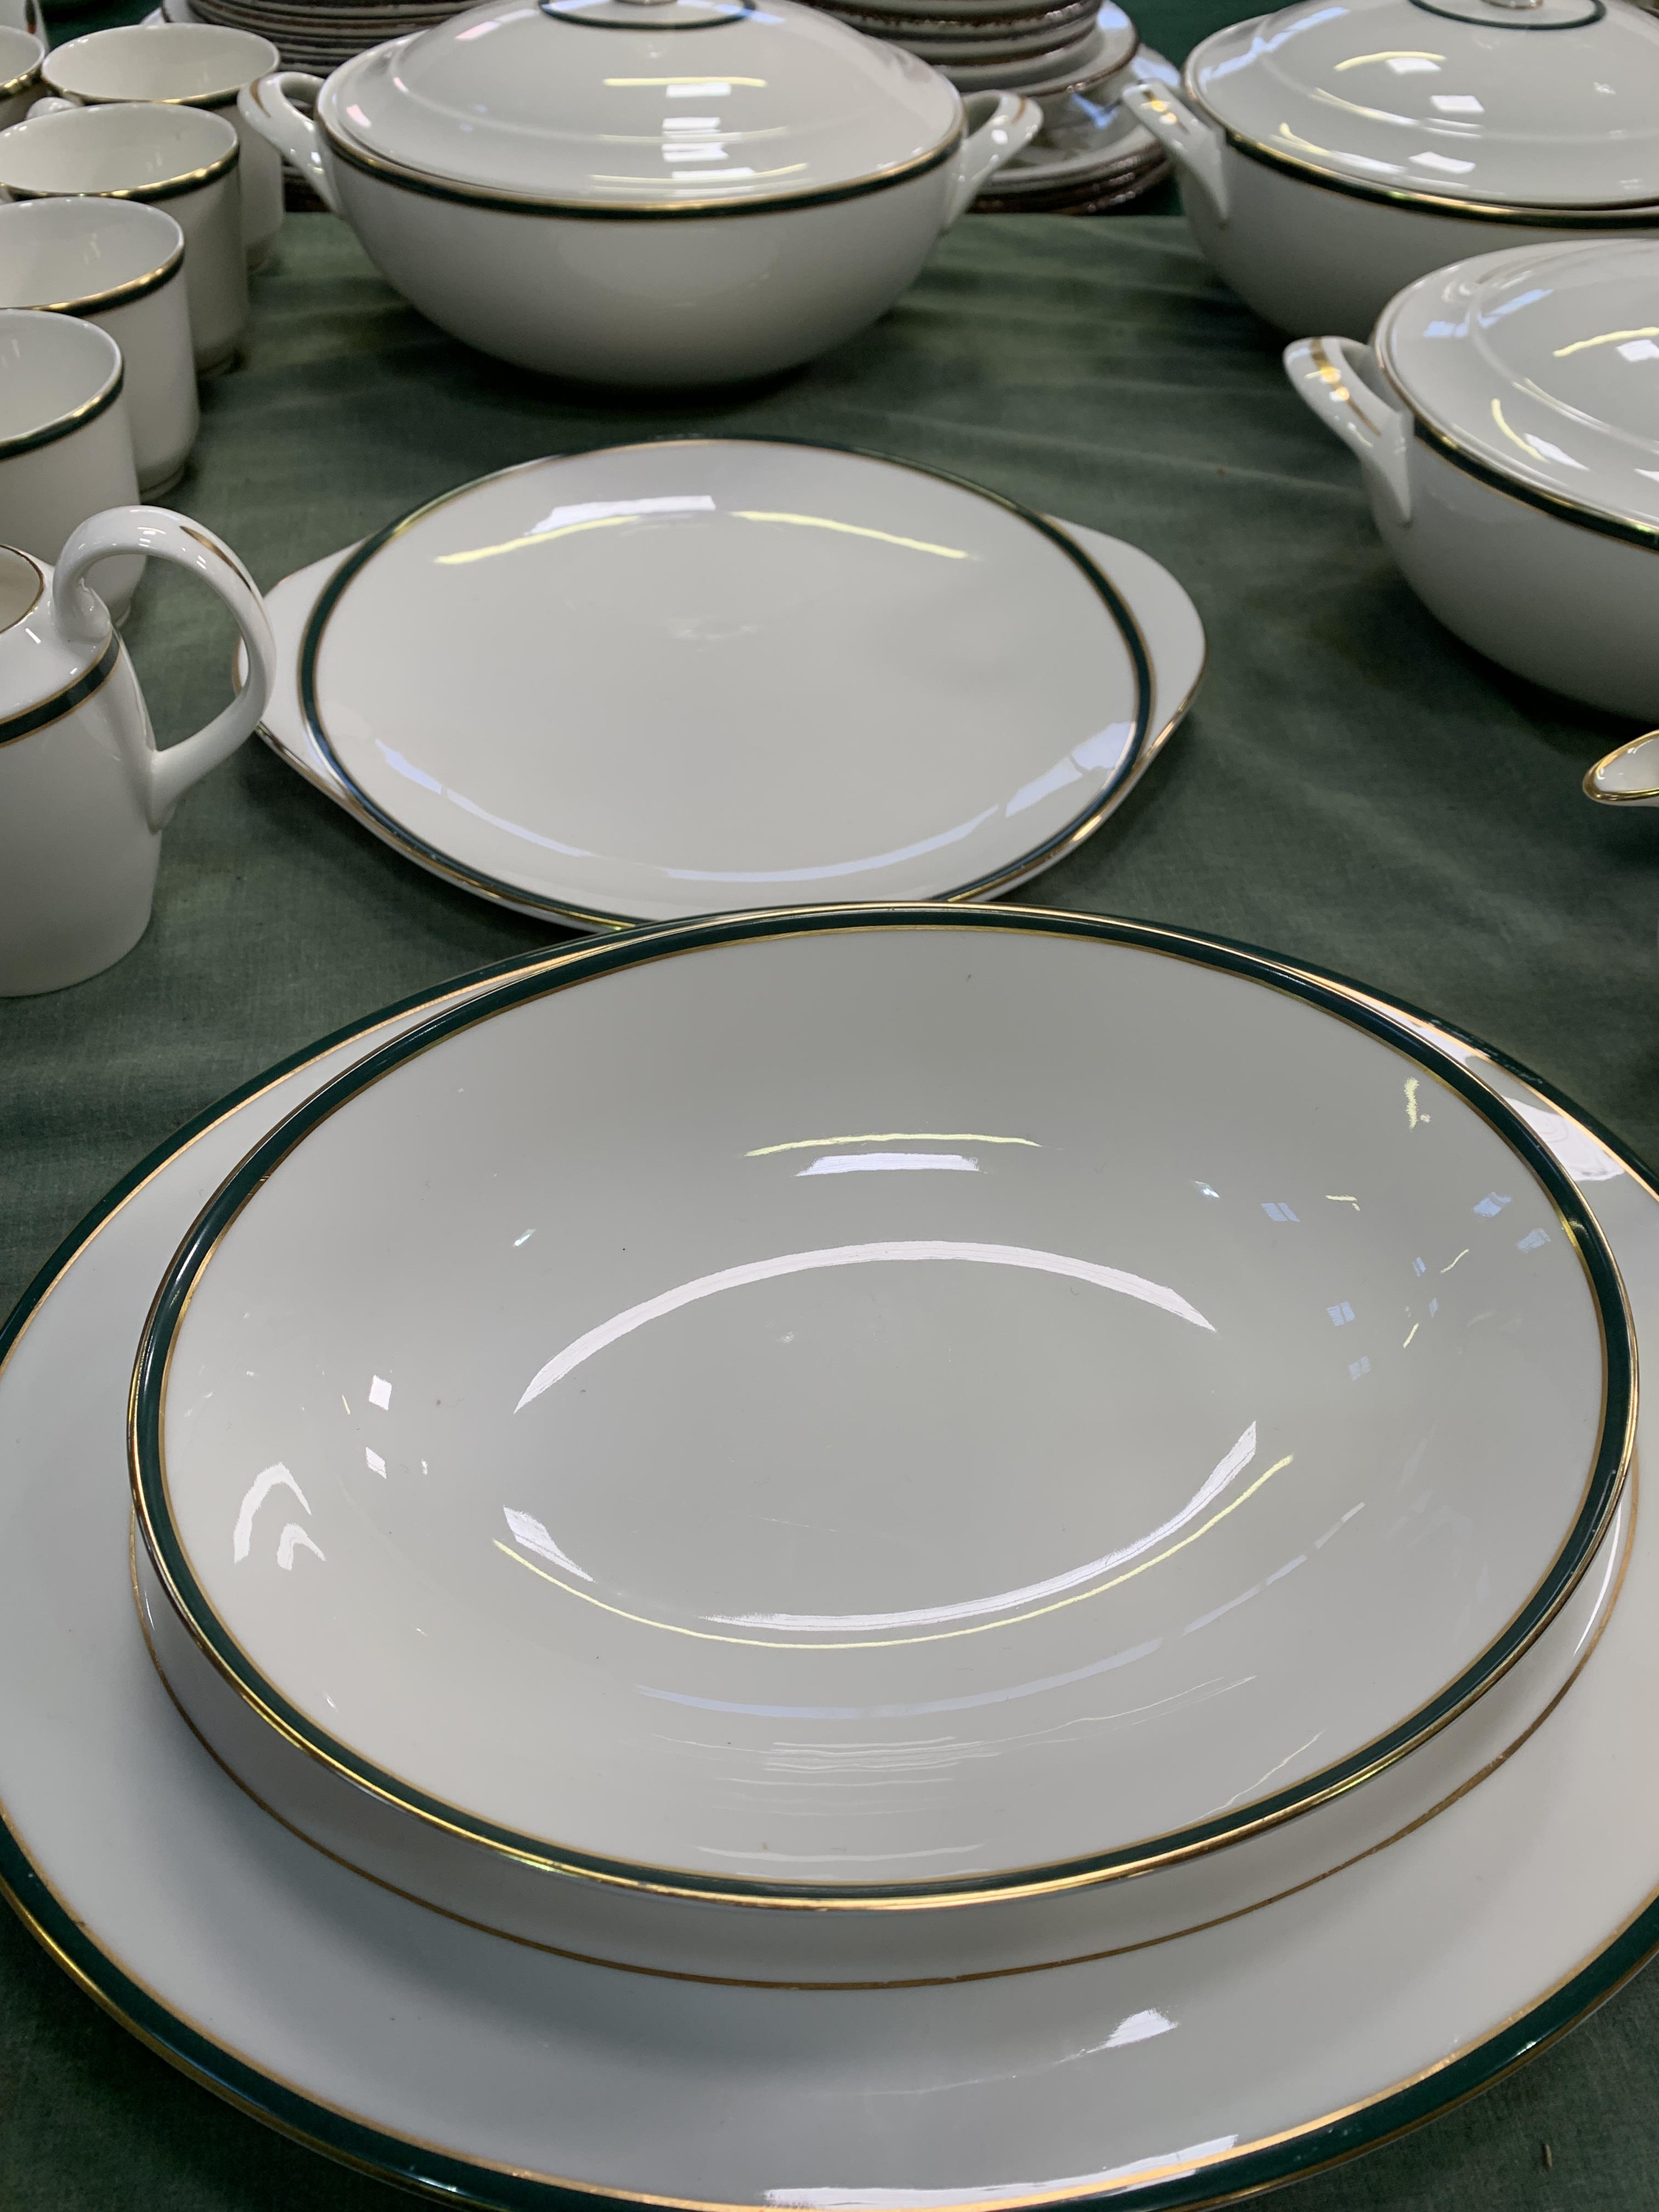 Royal Doulton 'Oxford Green' ten place setting dinner service - Image 6 of 6